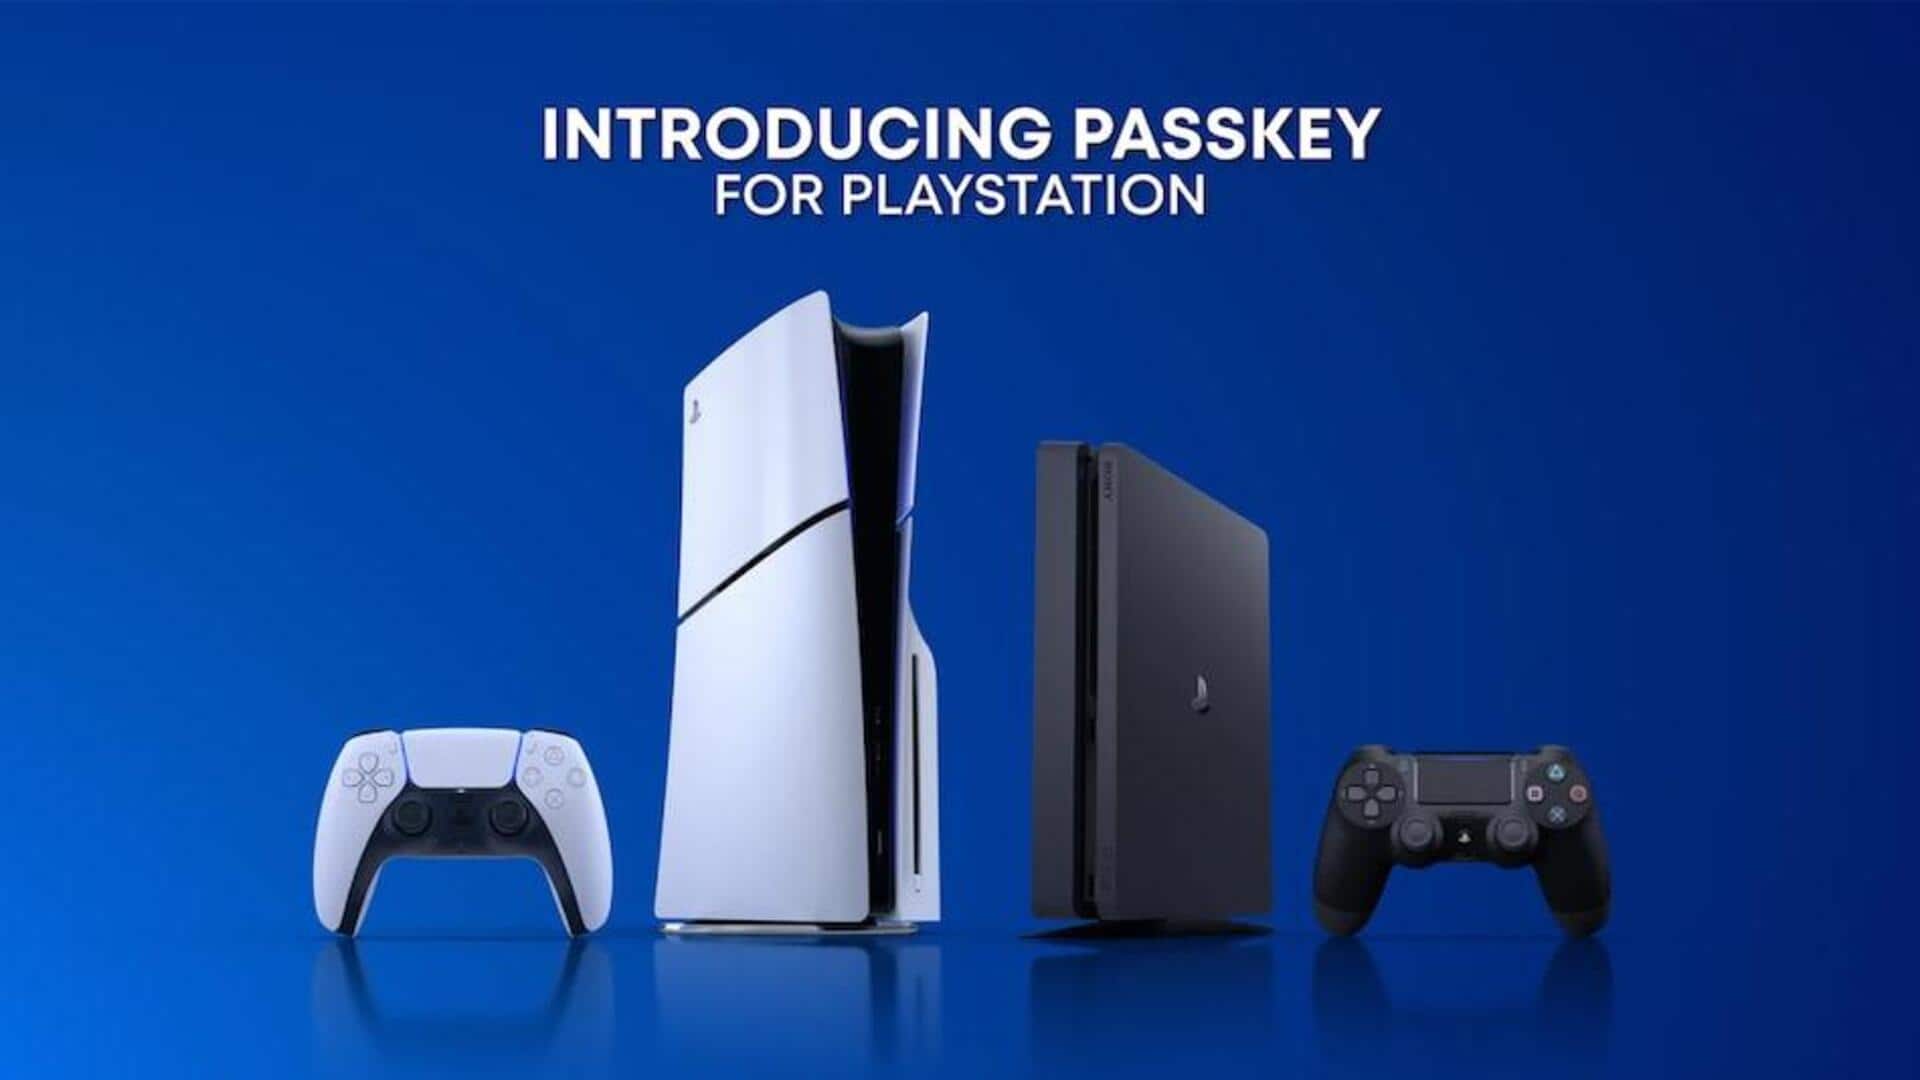 Sony rolls out passkey support on PlayStation: How to use?